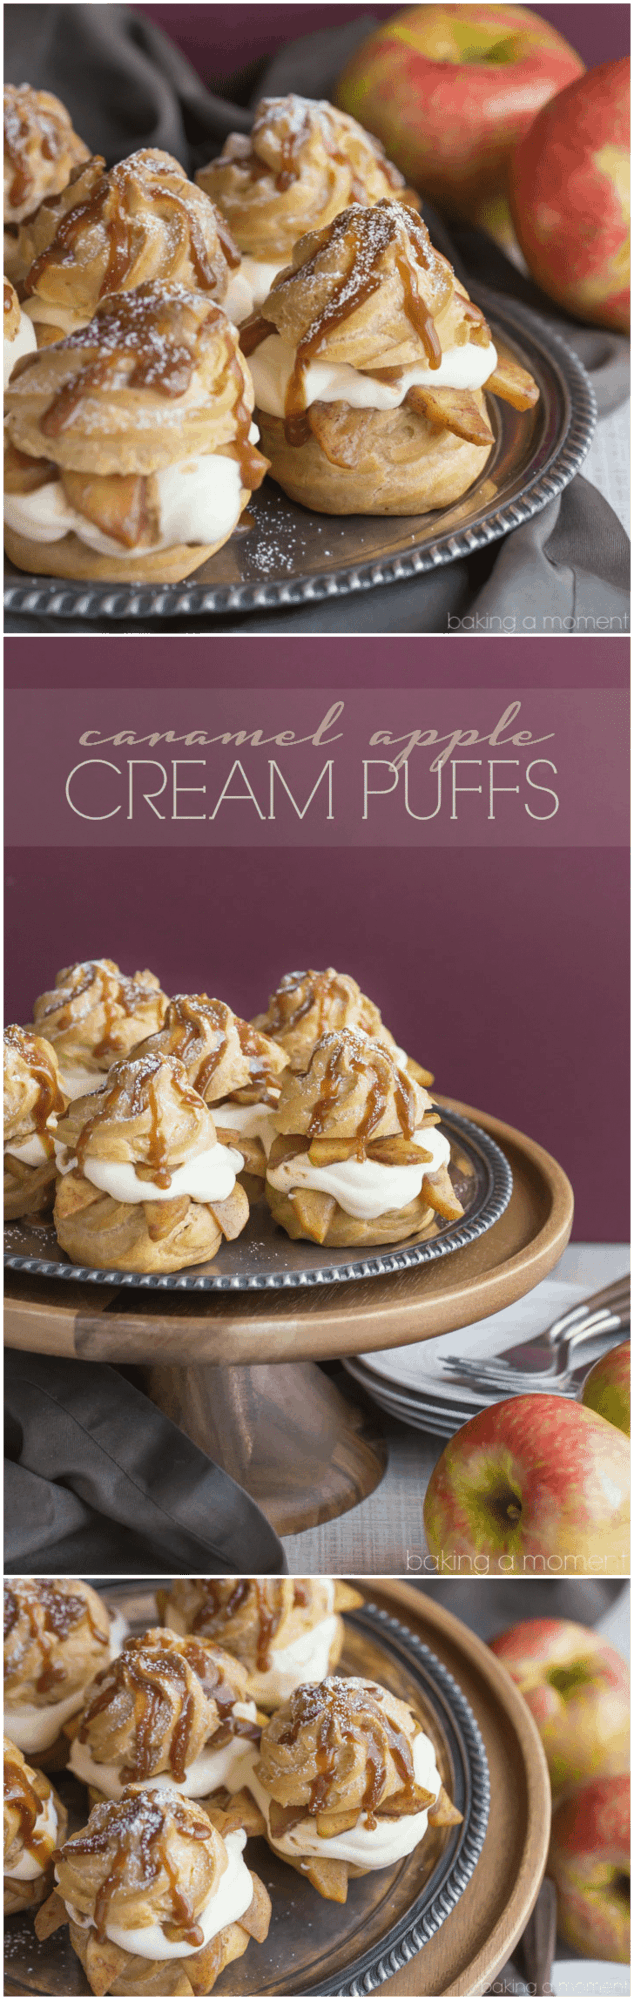 Caramel Apple Cream Puffs- Omg SO good! Loved the way the fluffy cream contrasts with the crusty puff... the caramel apples are the icing on the cake! Great make-ahead dessert for a special occasion.